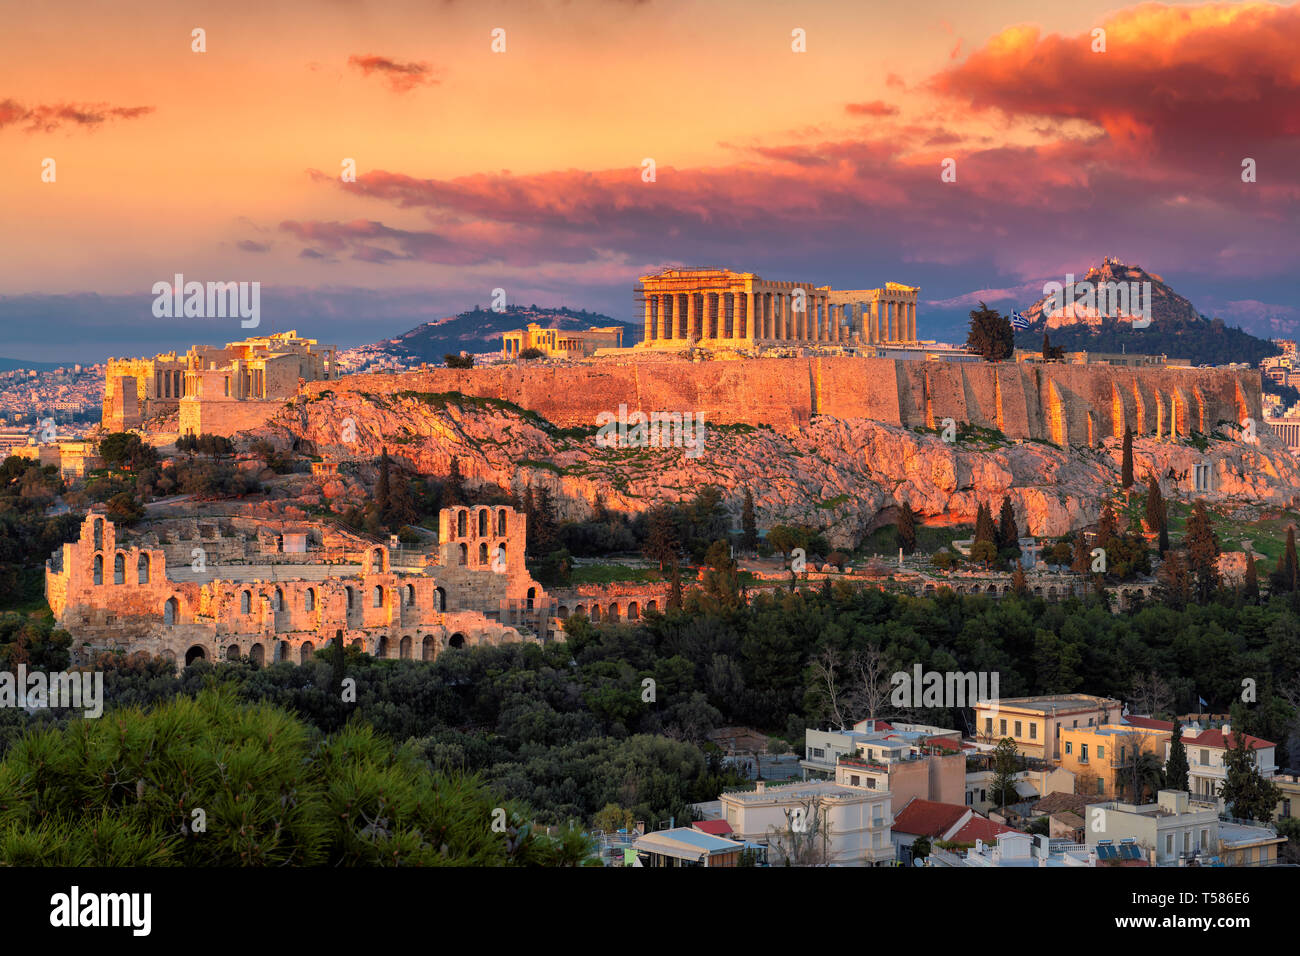 Sunset view of the Acropolis of Athens, Greece, with the Parthenon Temple Stock Photo